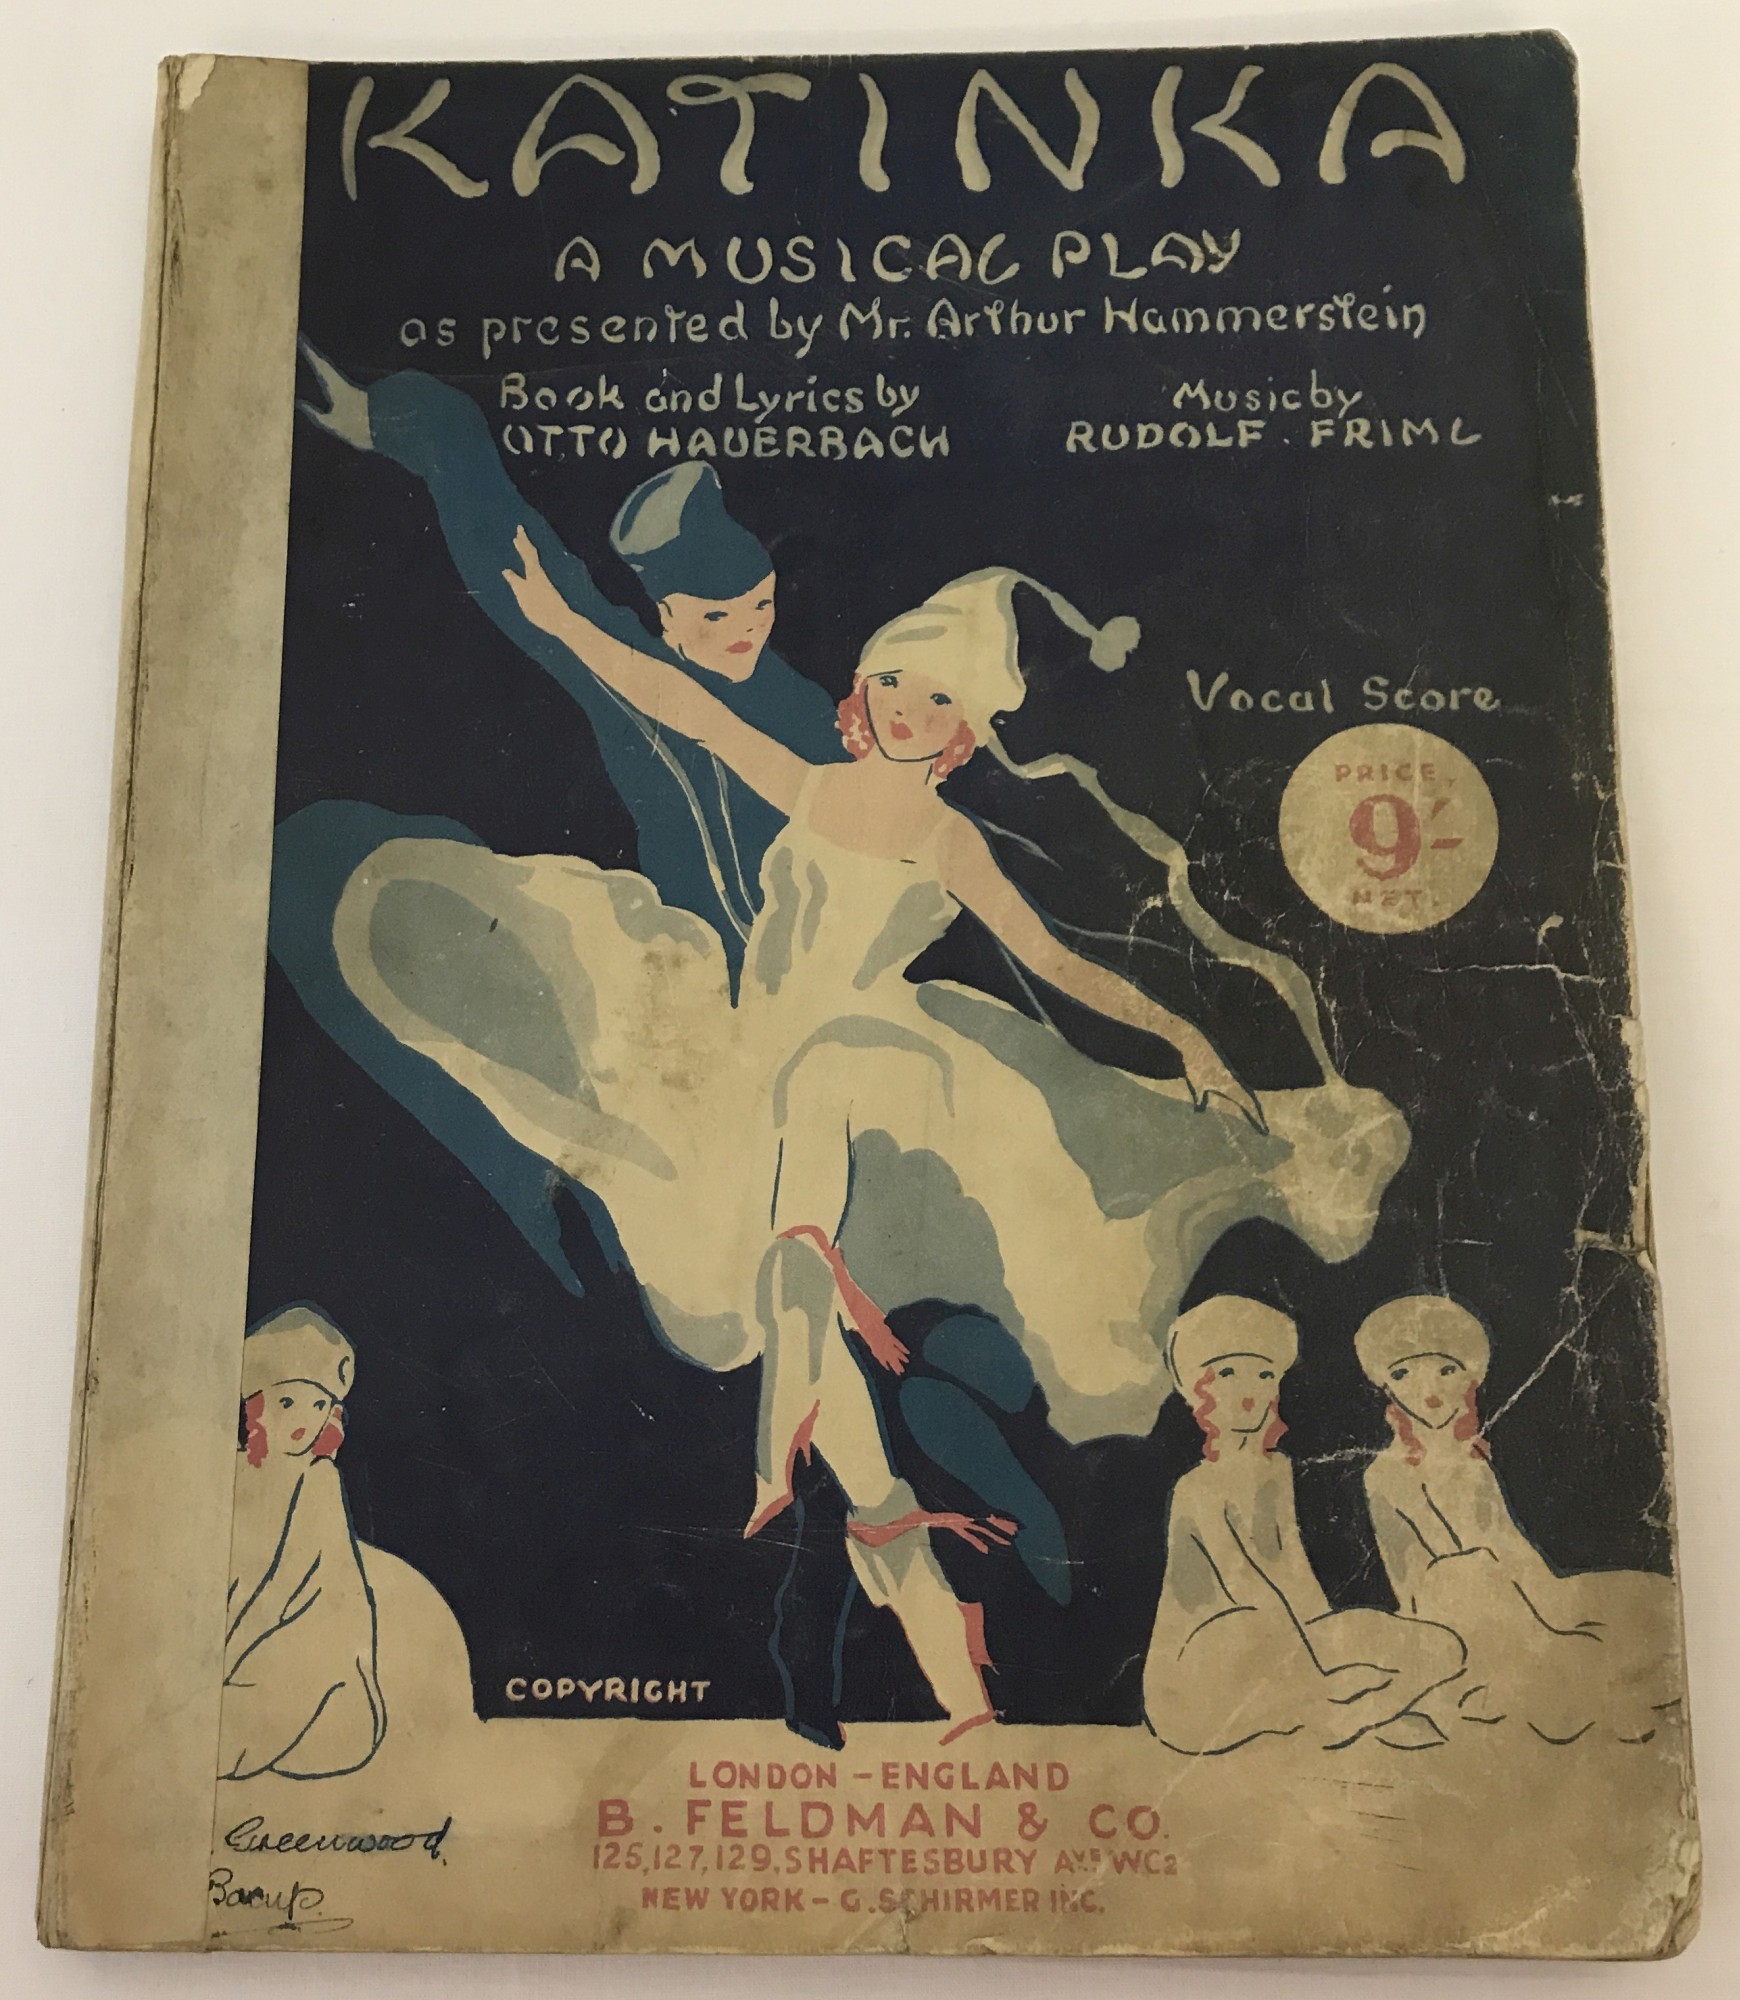 An antique vocal score of "Katinka, A Musical Play". Produced in 1916 by Arthur Hammerstein.